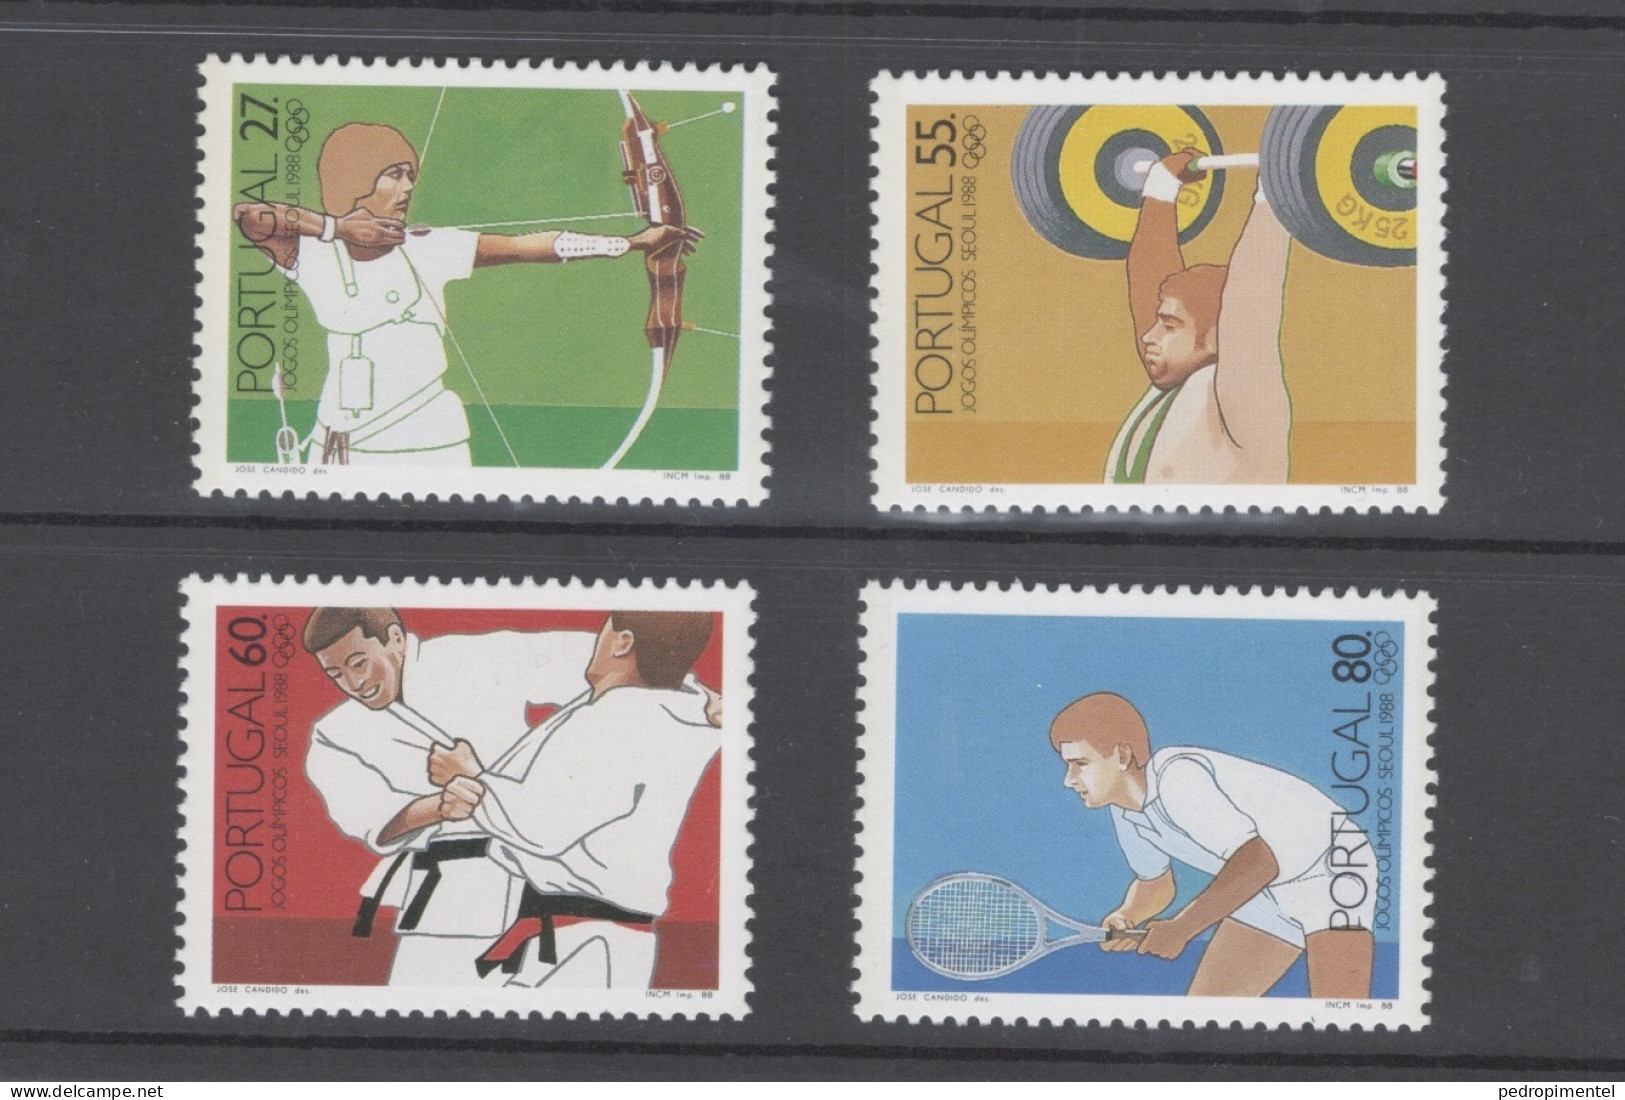 Portugal Madeira 1988 "Seoul Olympic Games" Condition MNH OG Mundifil #1854-1857 - Nuovi